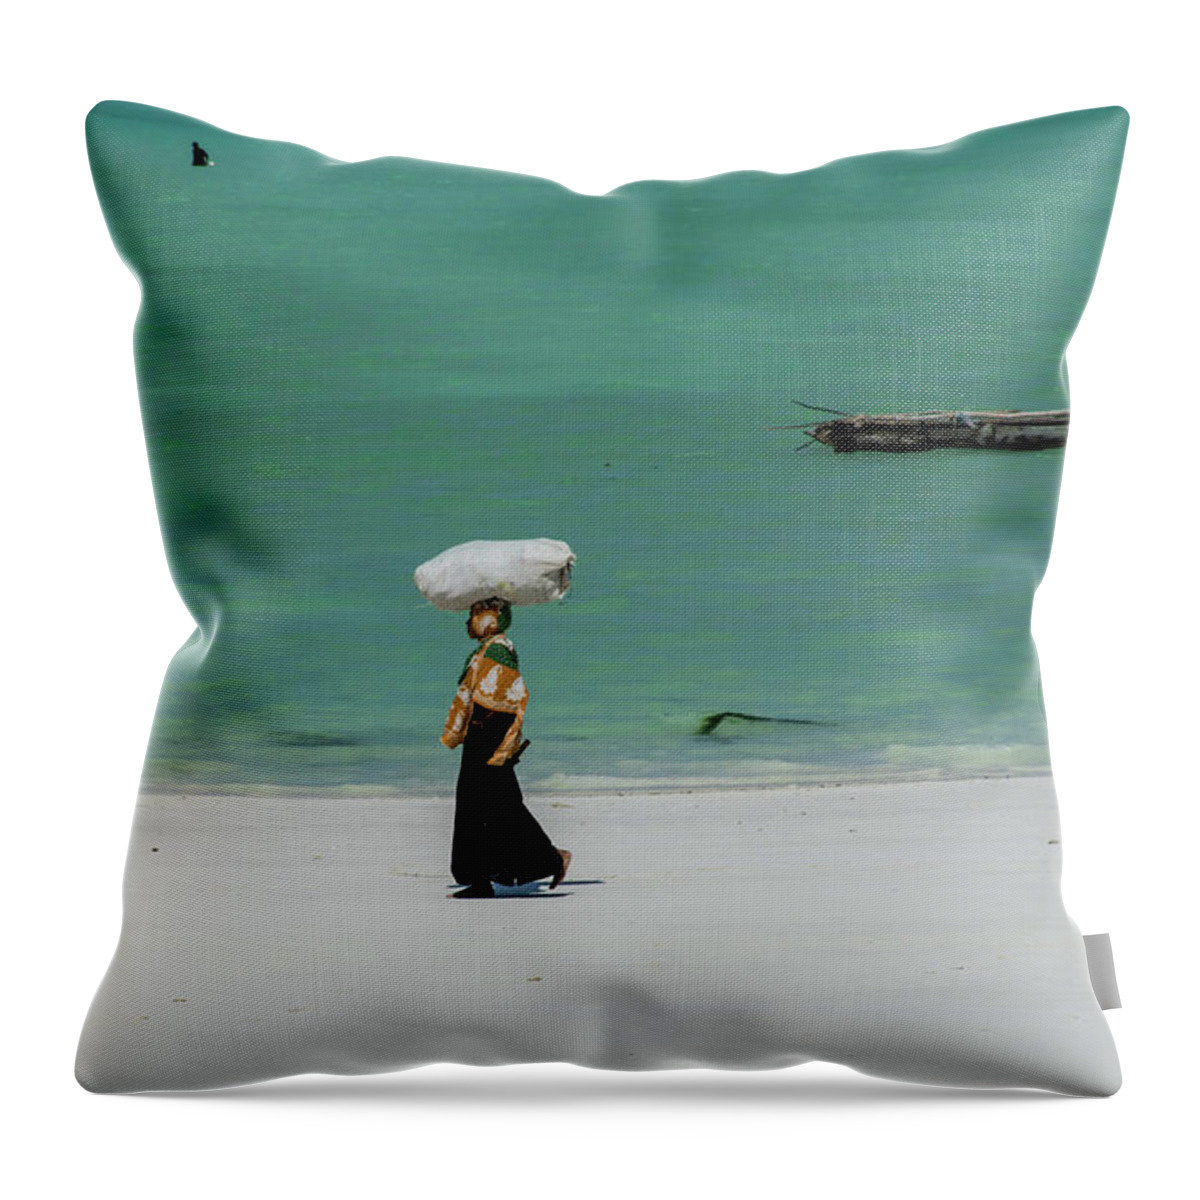  Throw Pillow featuring the photograph Women Worker by Mache Del Campo